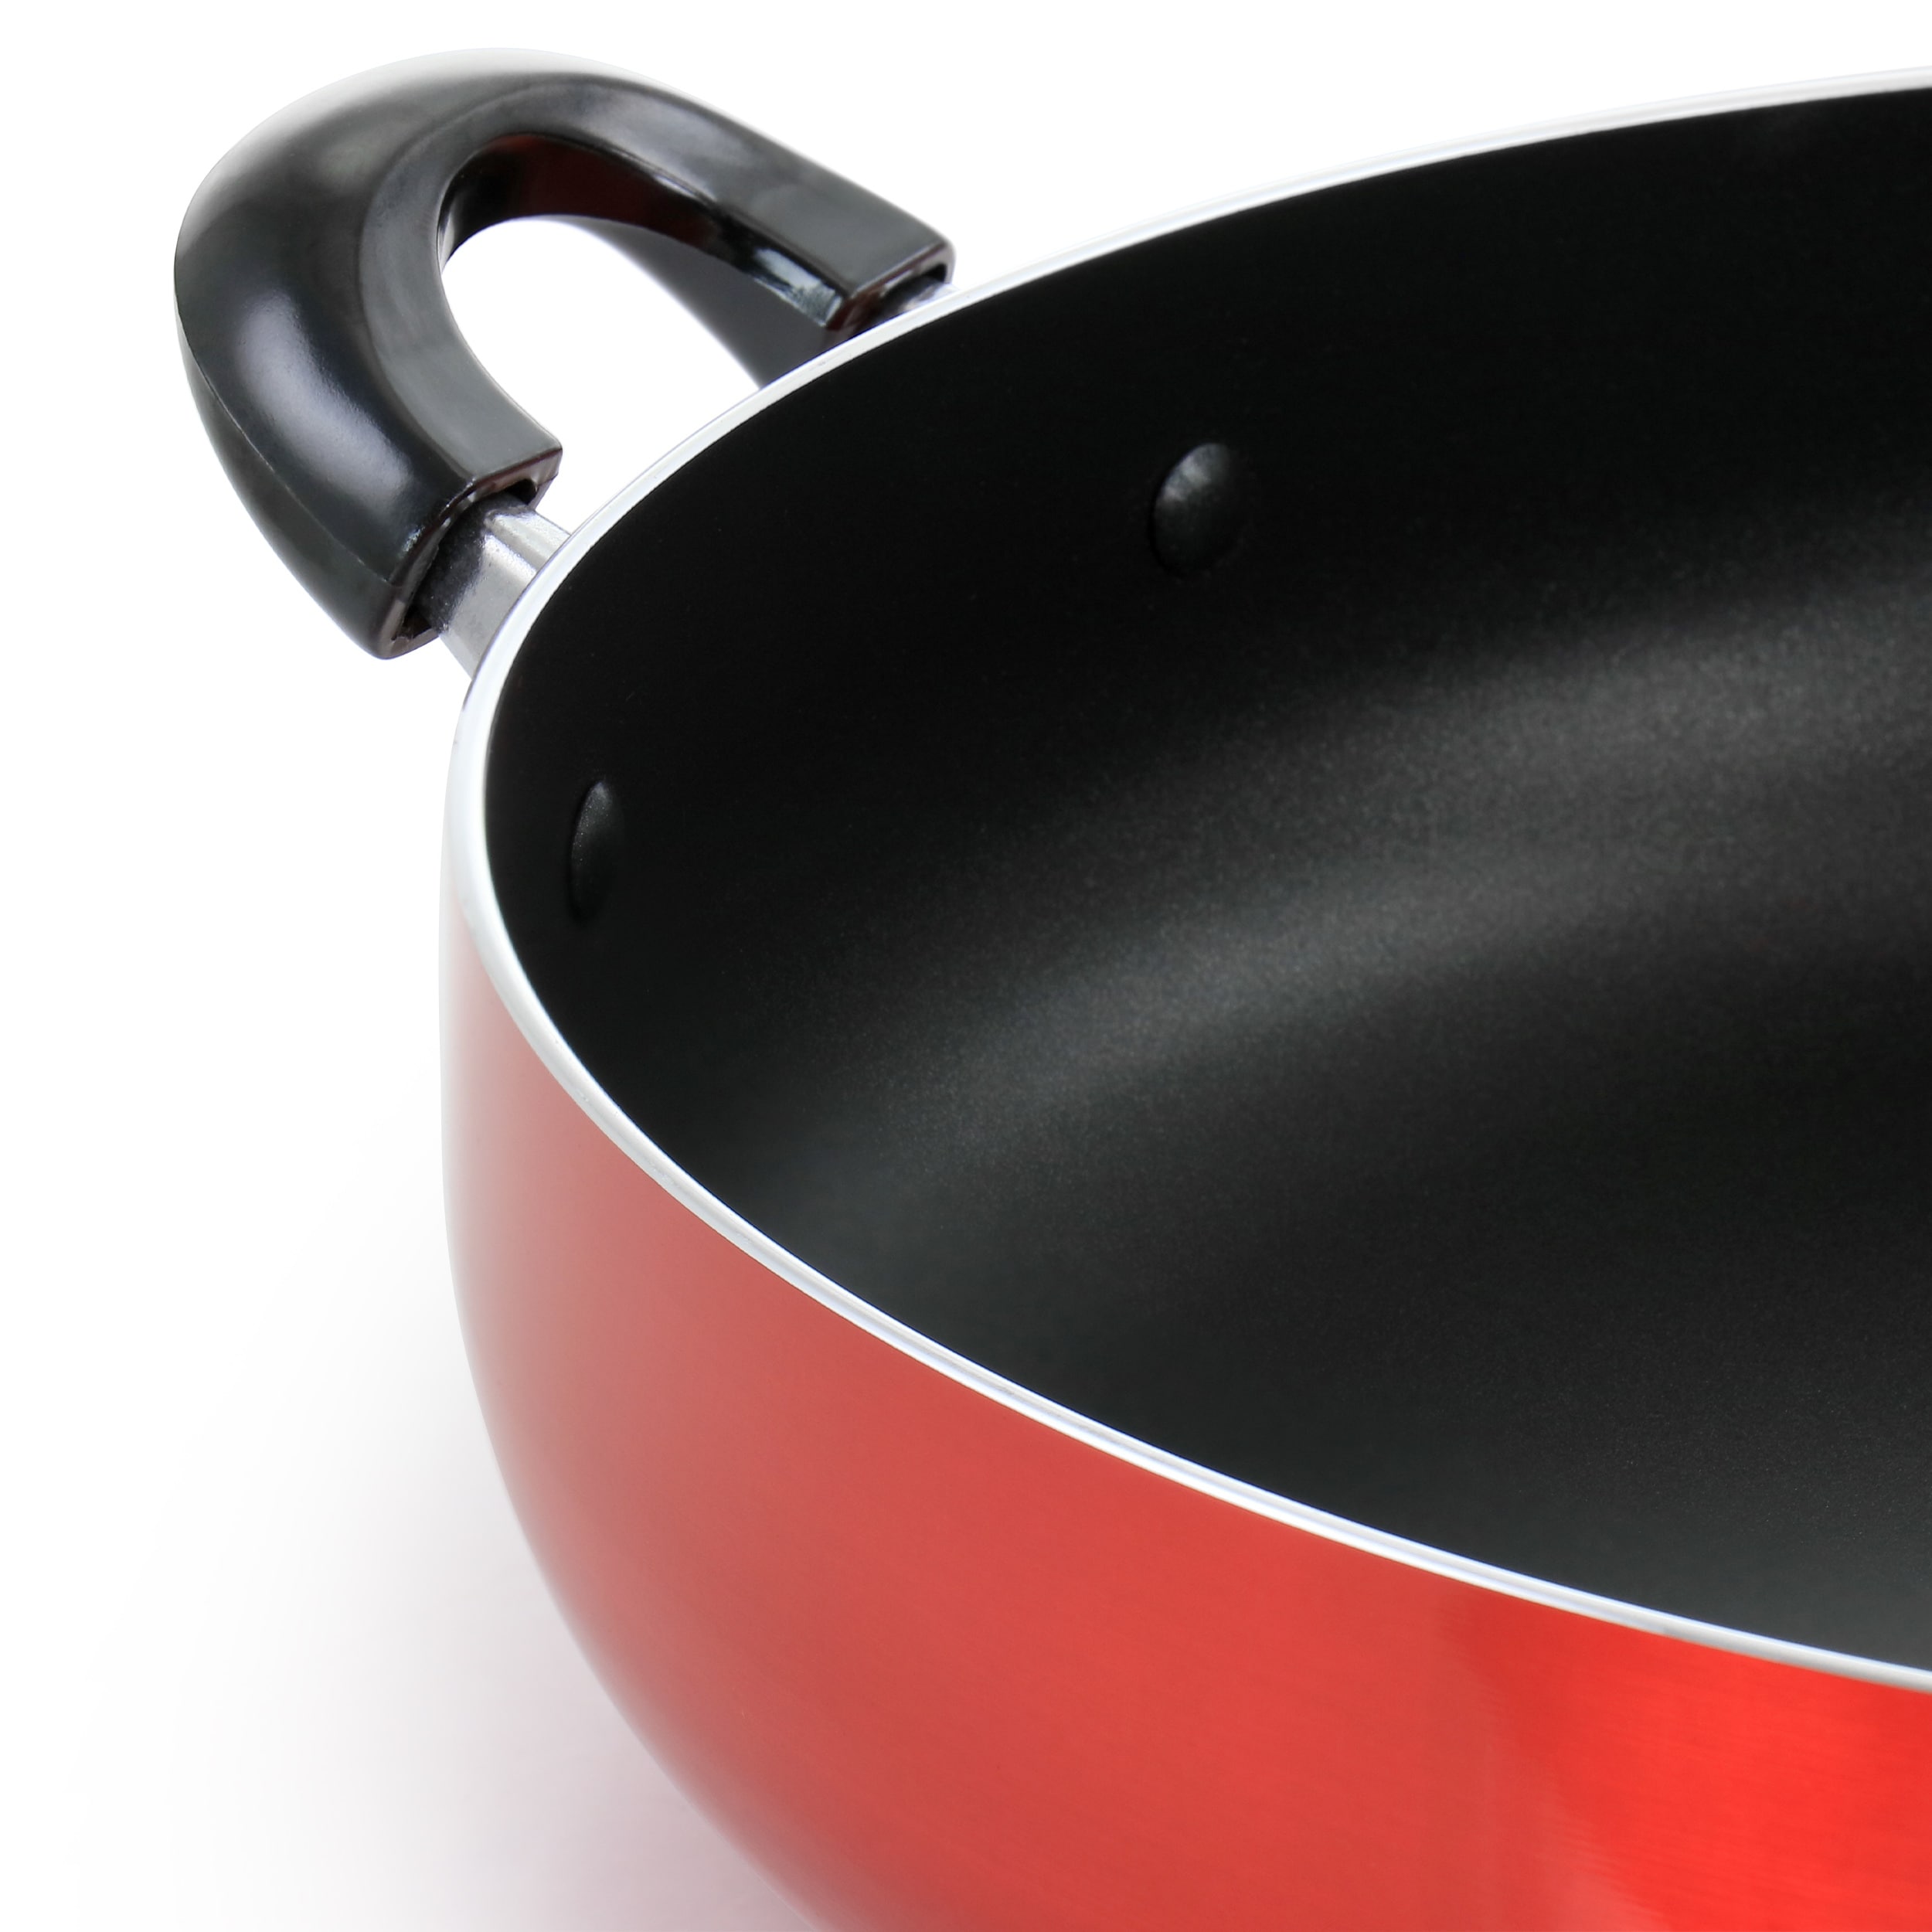 https://ak1.ostkcdn.com/images/products/is/images/direct/a36629b8d589887dc4136b6862203a7c16bb803e/Better-Chef-16-Inch-Red-Aluminum-Deep-Fryer-Pan-with-Glass-Lid.jpg